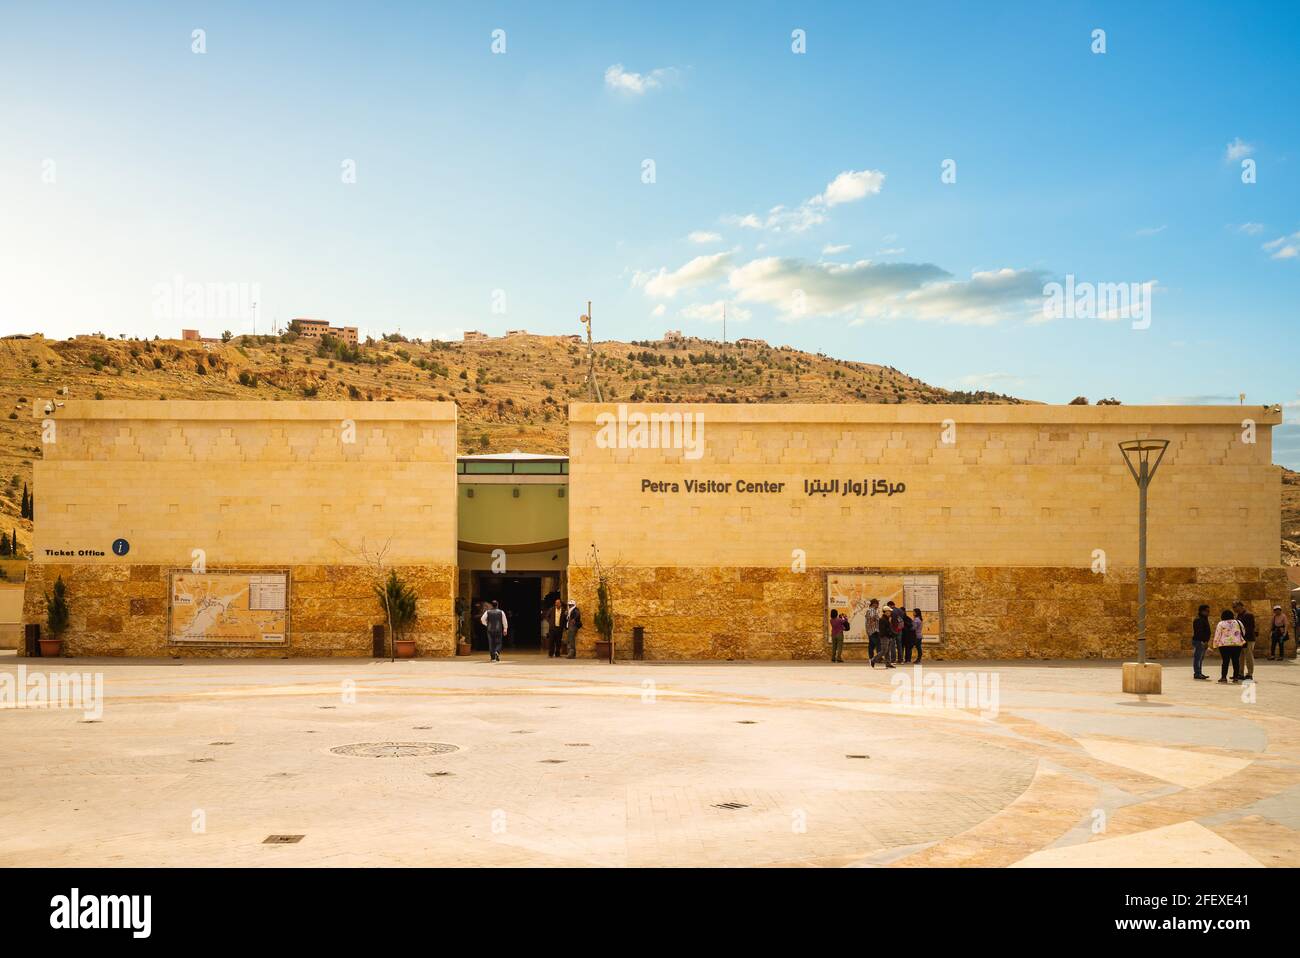 March 23, 2019: Petra visitor center located on the edge of the town of Wadi Musa, jordan. It is open daily and sells tickets, arranges for guides, pr Stock Photo